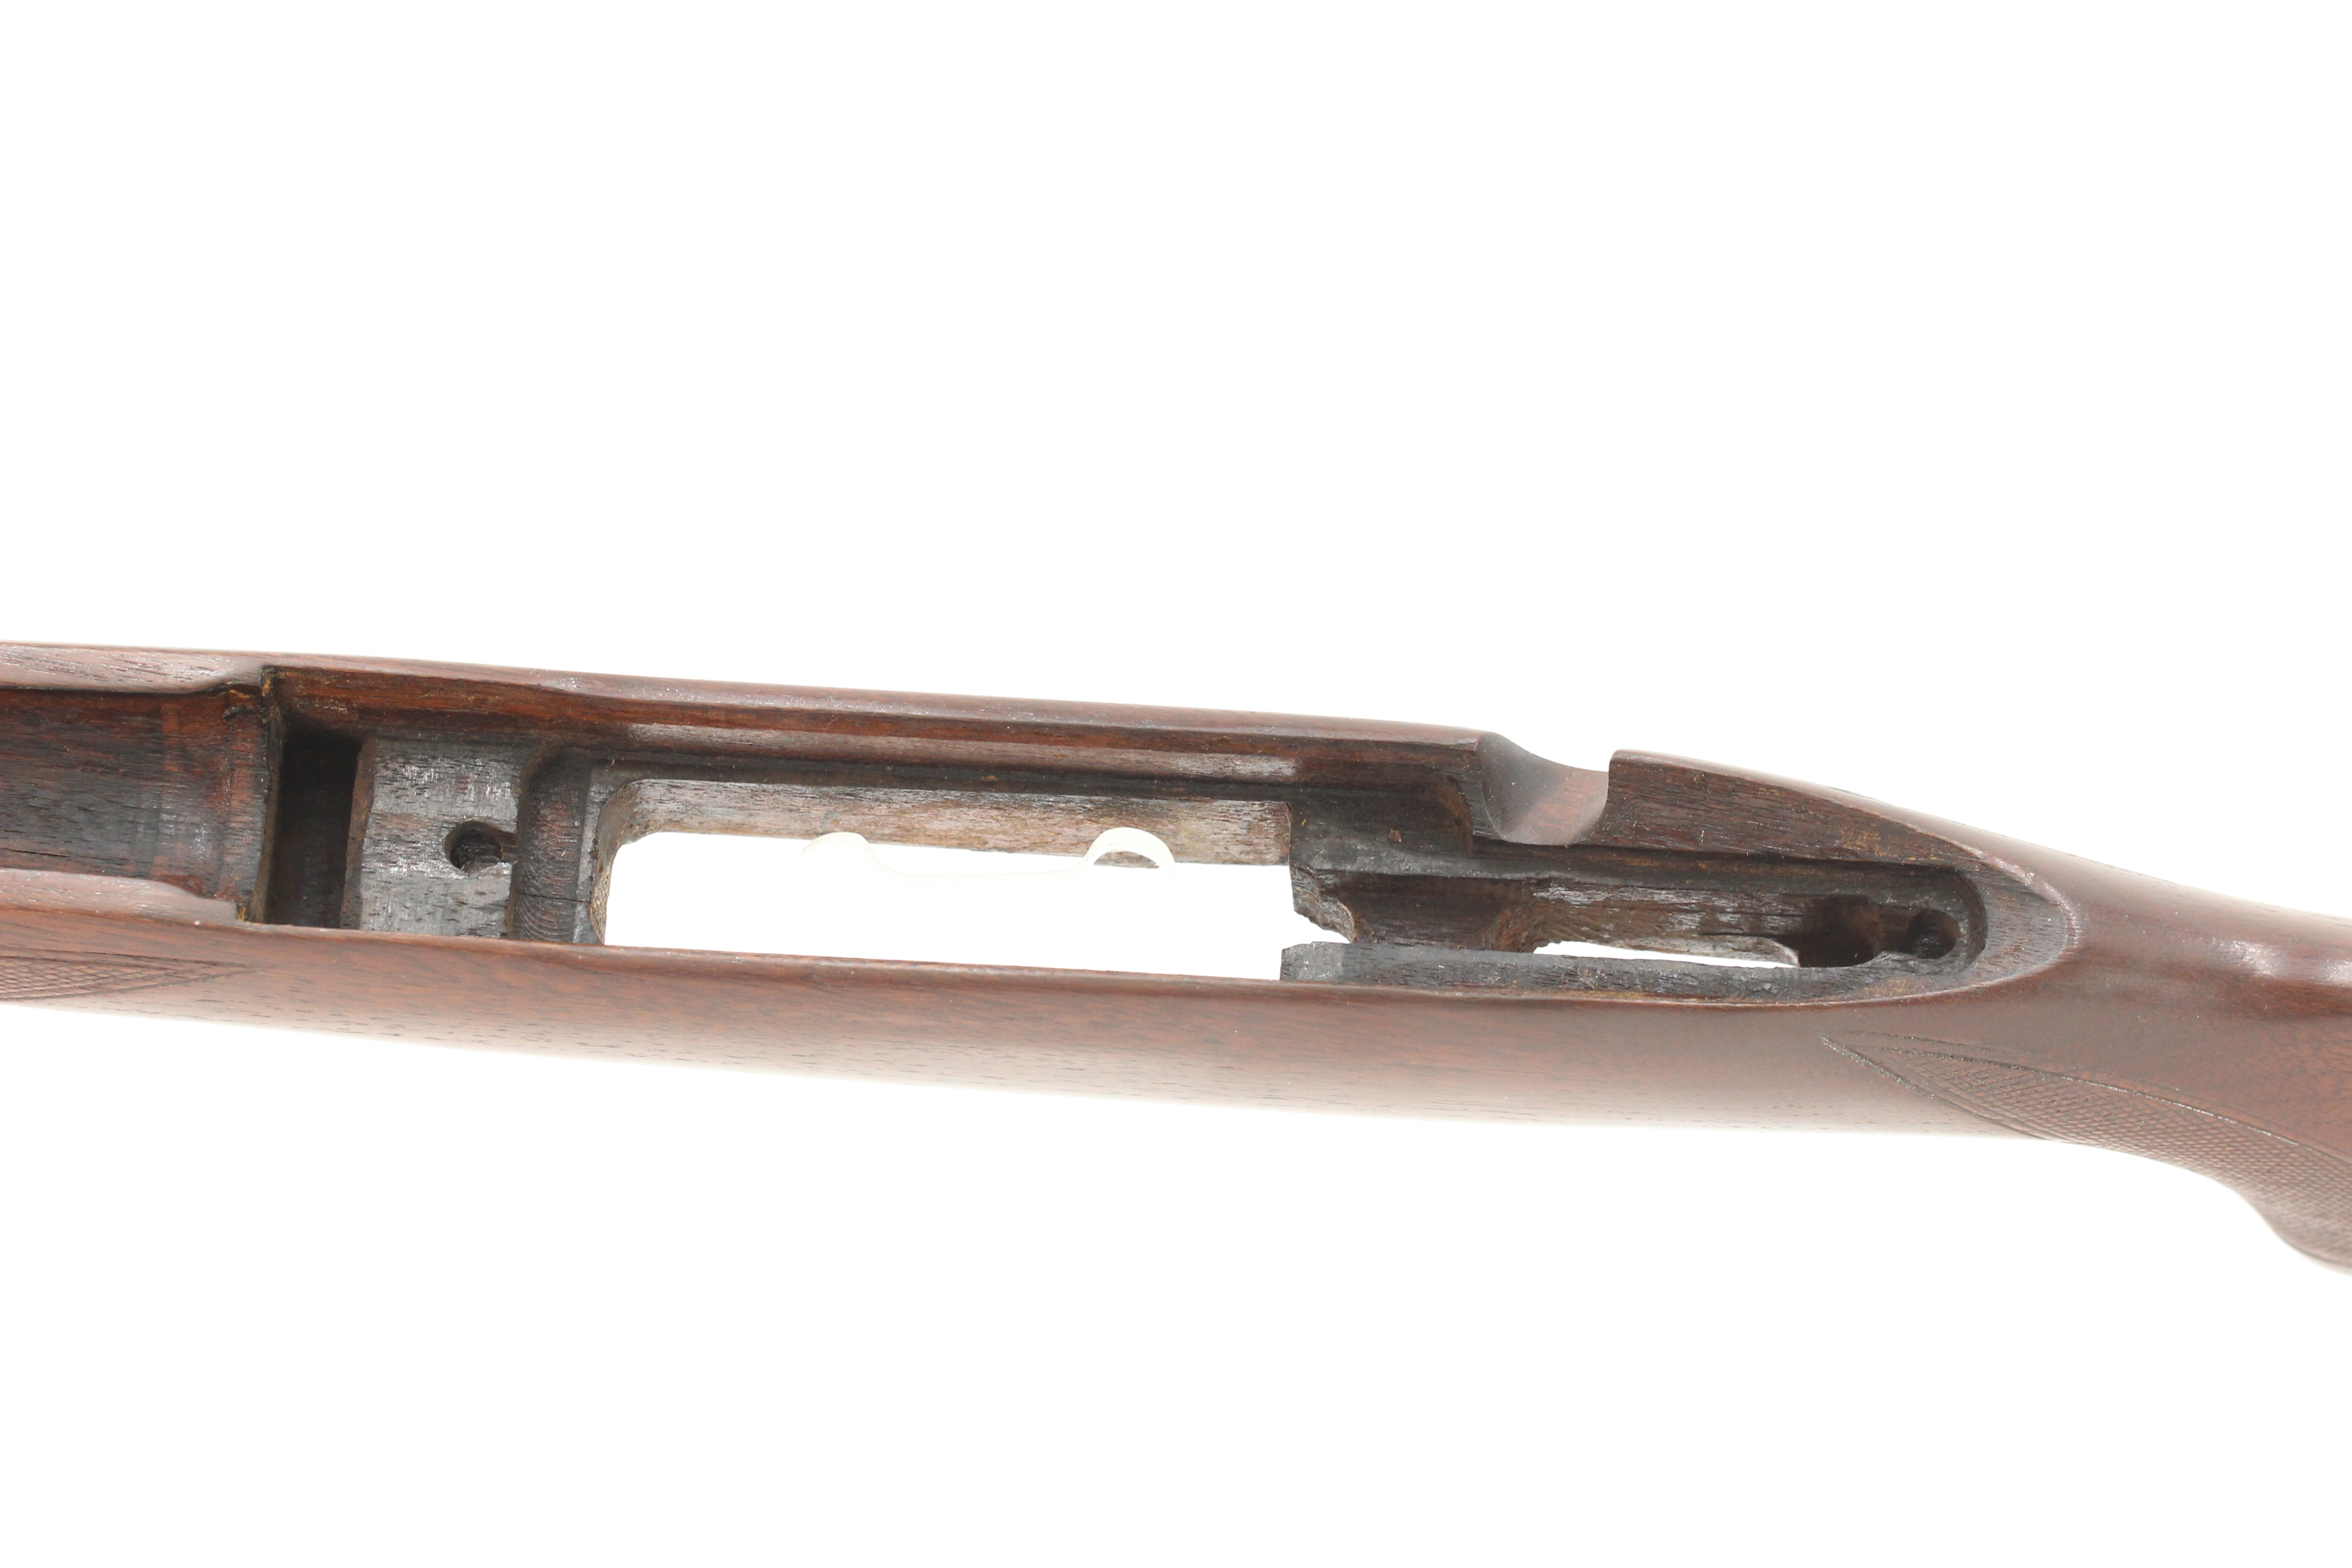 1952-1960 Low Comb Featherweight Rifle Stock